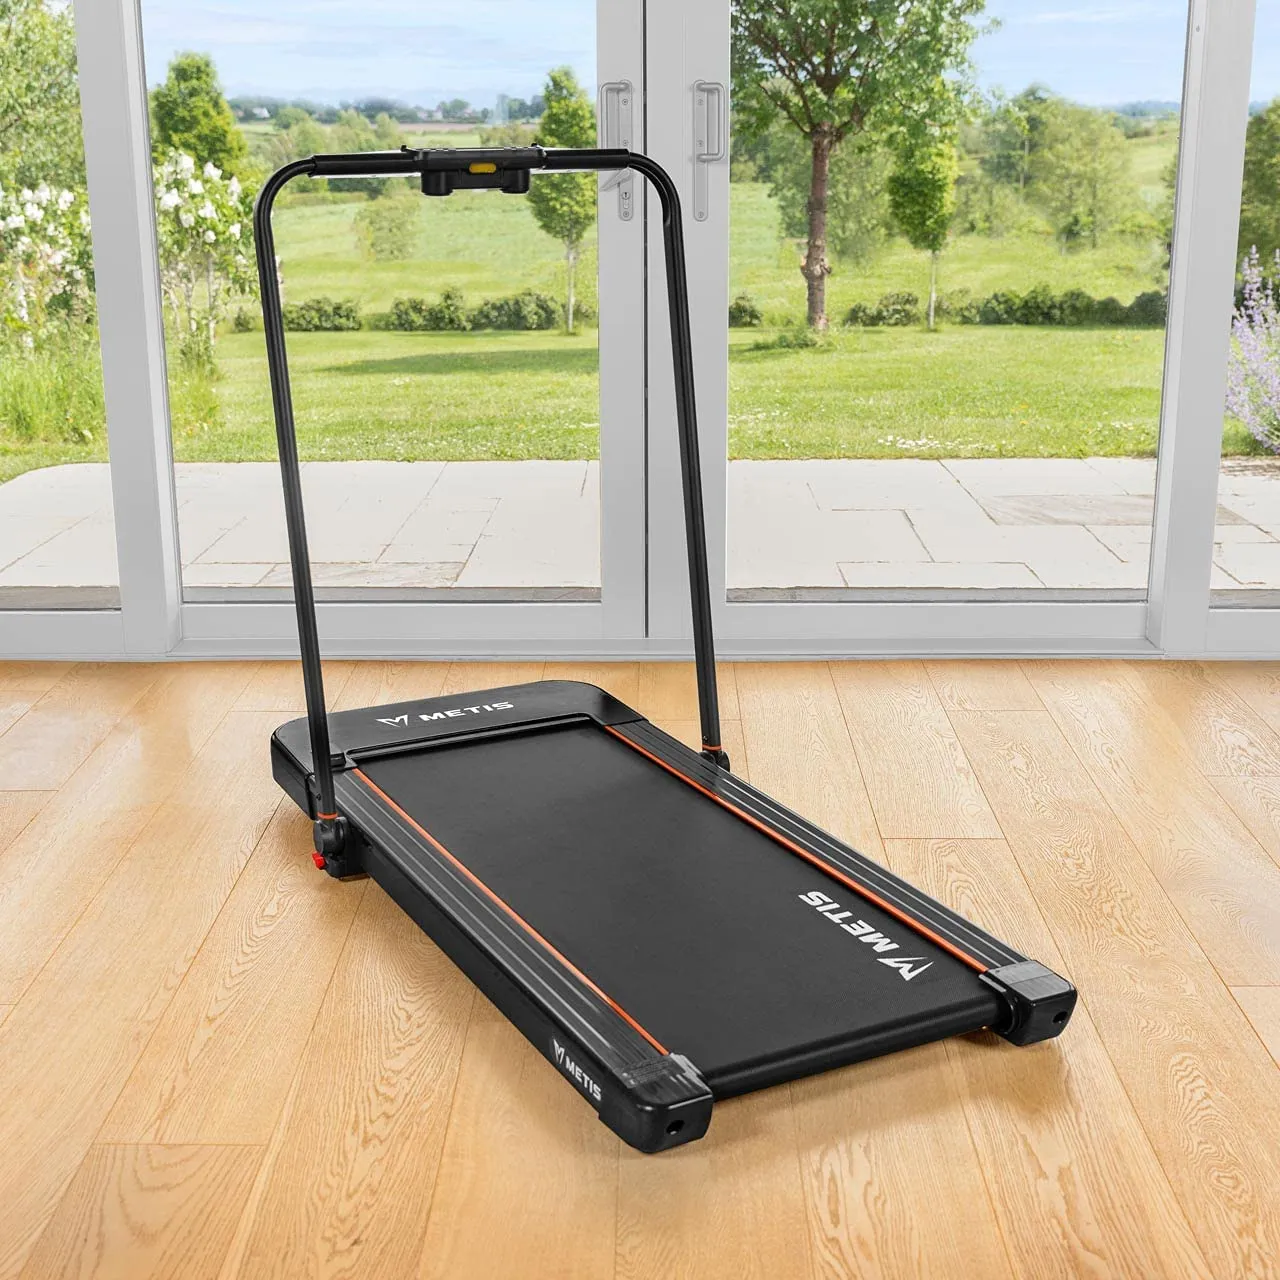 How May I Solve The Noise Problem Of My Electric Treadmill